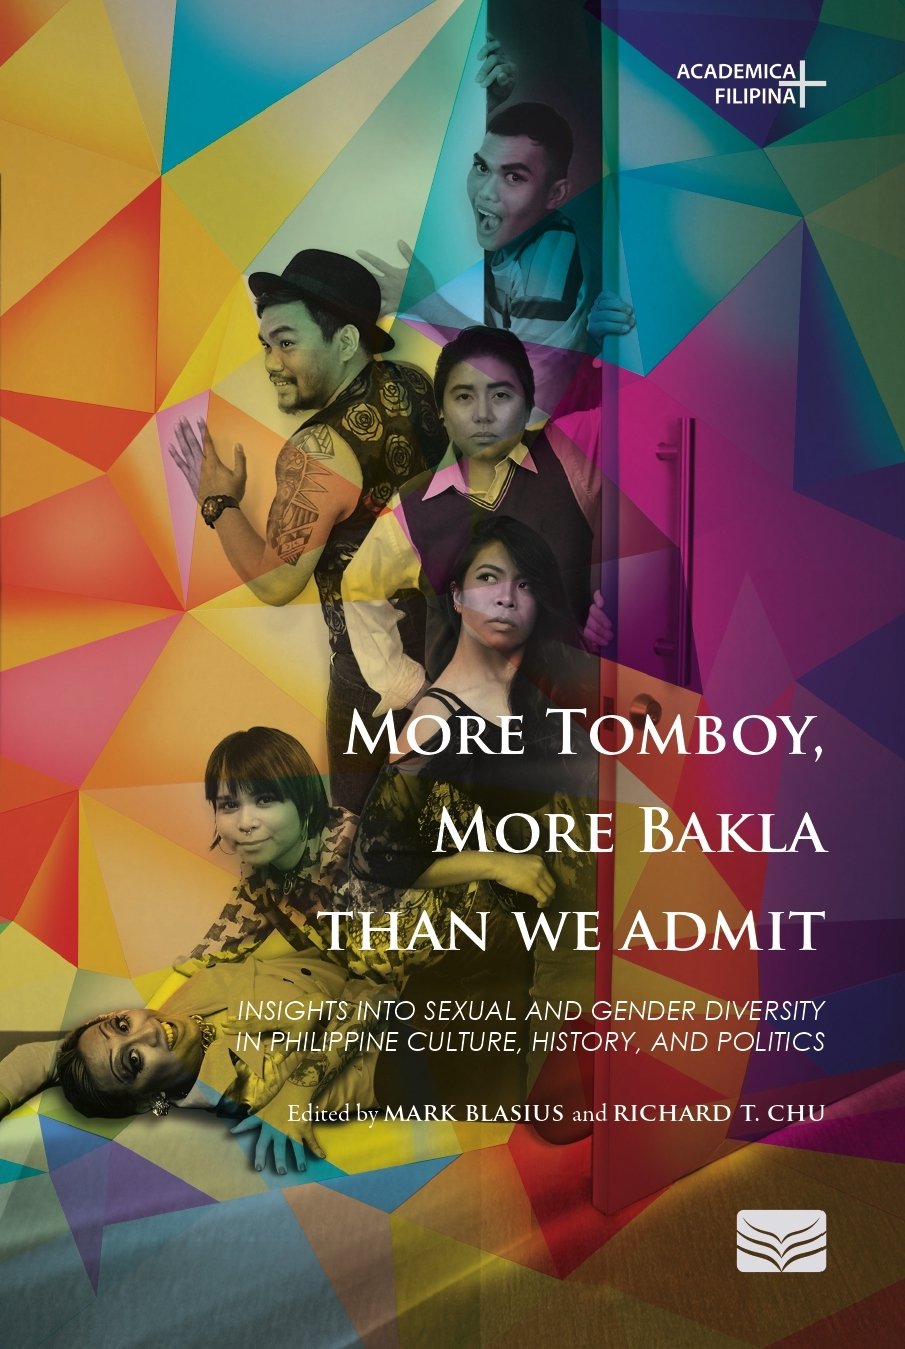 More Tomboy, More Bakla Than We Admit: Insights into Sexual and Gender Diversity in Philippine Culture, History, and Politics